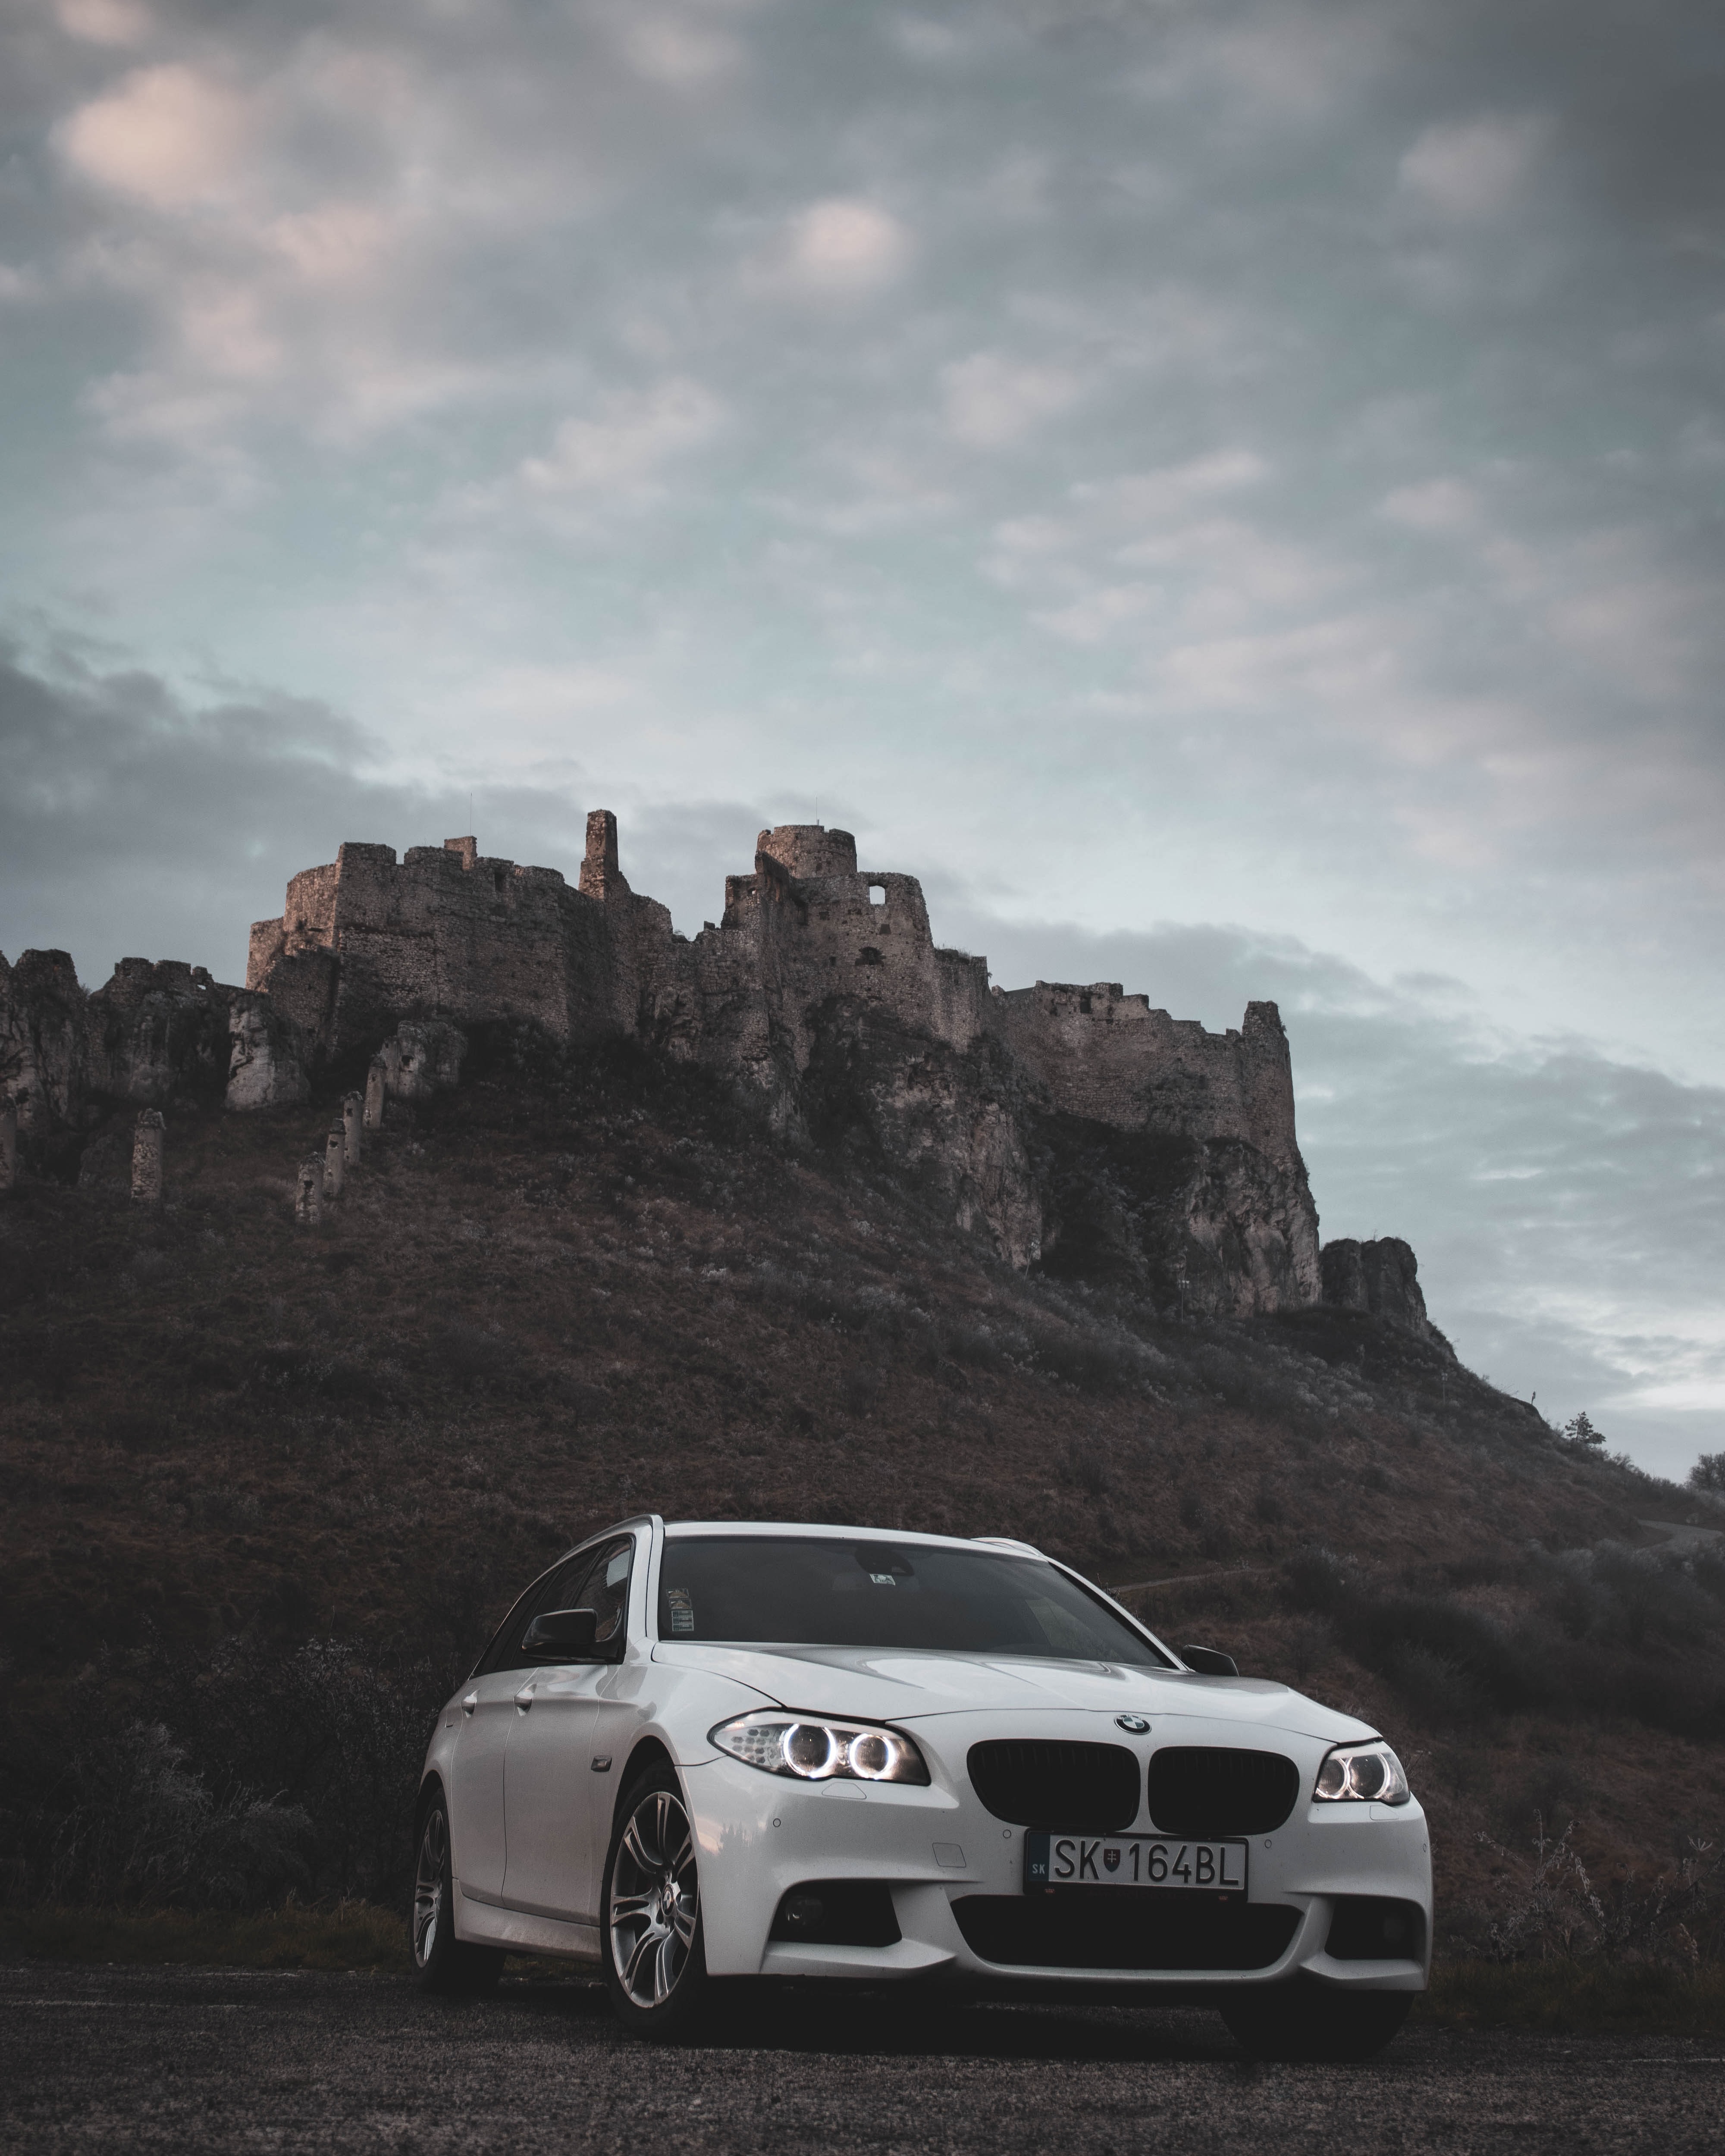 104936 download wallpaper front view, nature, bmw, cars, white, rock, car screensavers and pictures for free